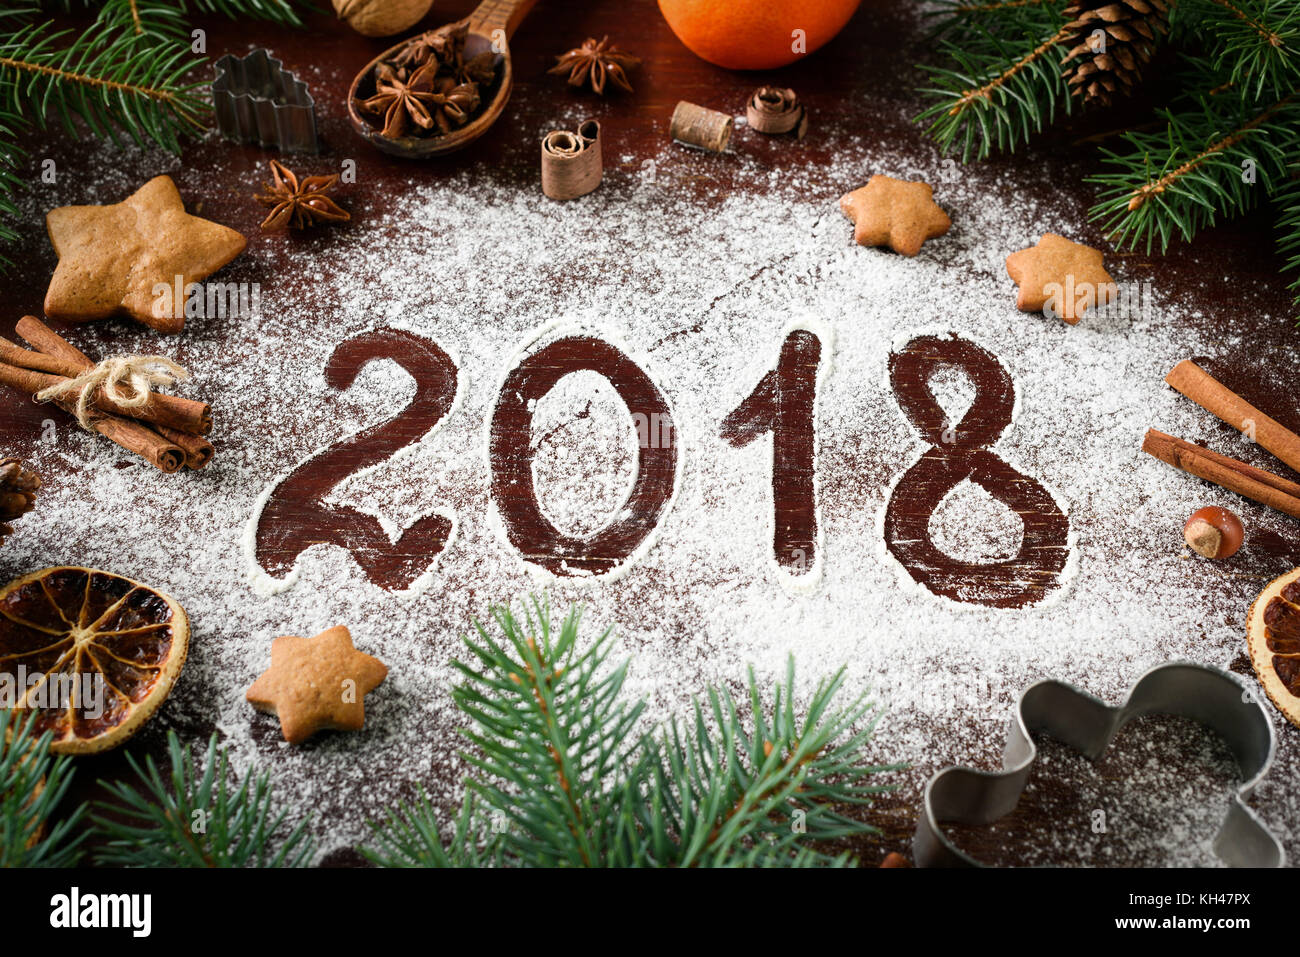 New Year 2018 written on flour and Christmas Decorations Gingerbread cookies, cinnamin, oranges, spices, nuts and cookie cutters on wooden background. Stock Photo